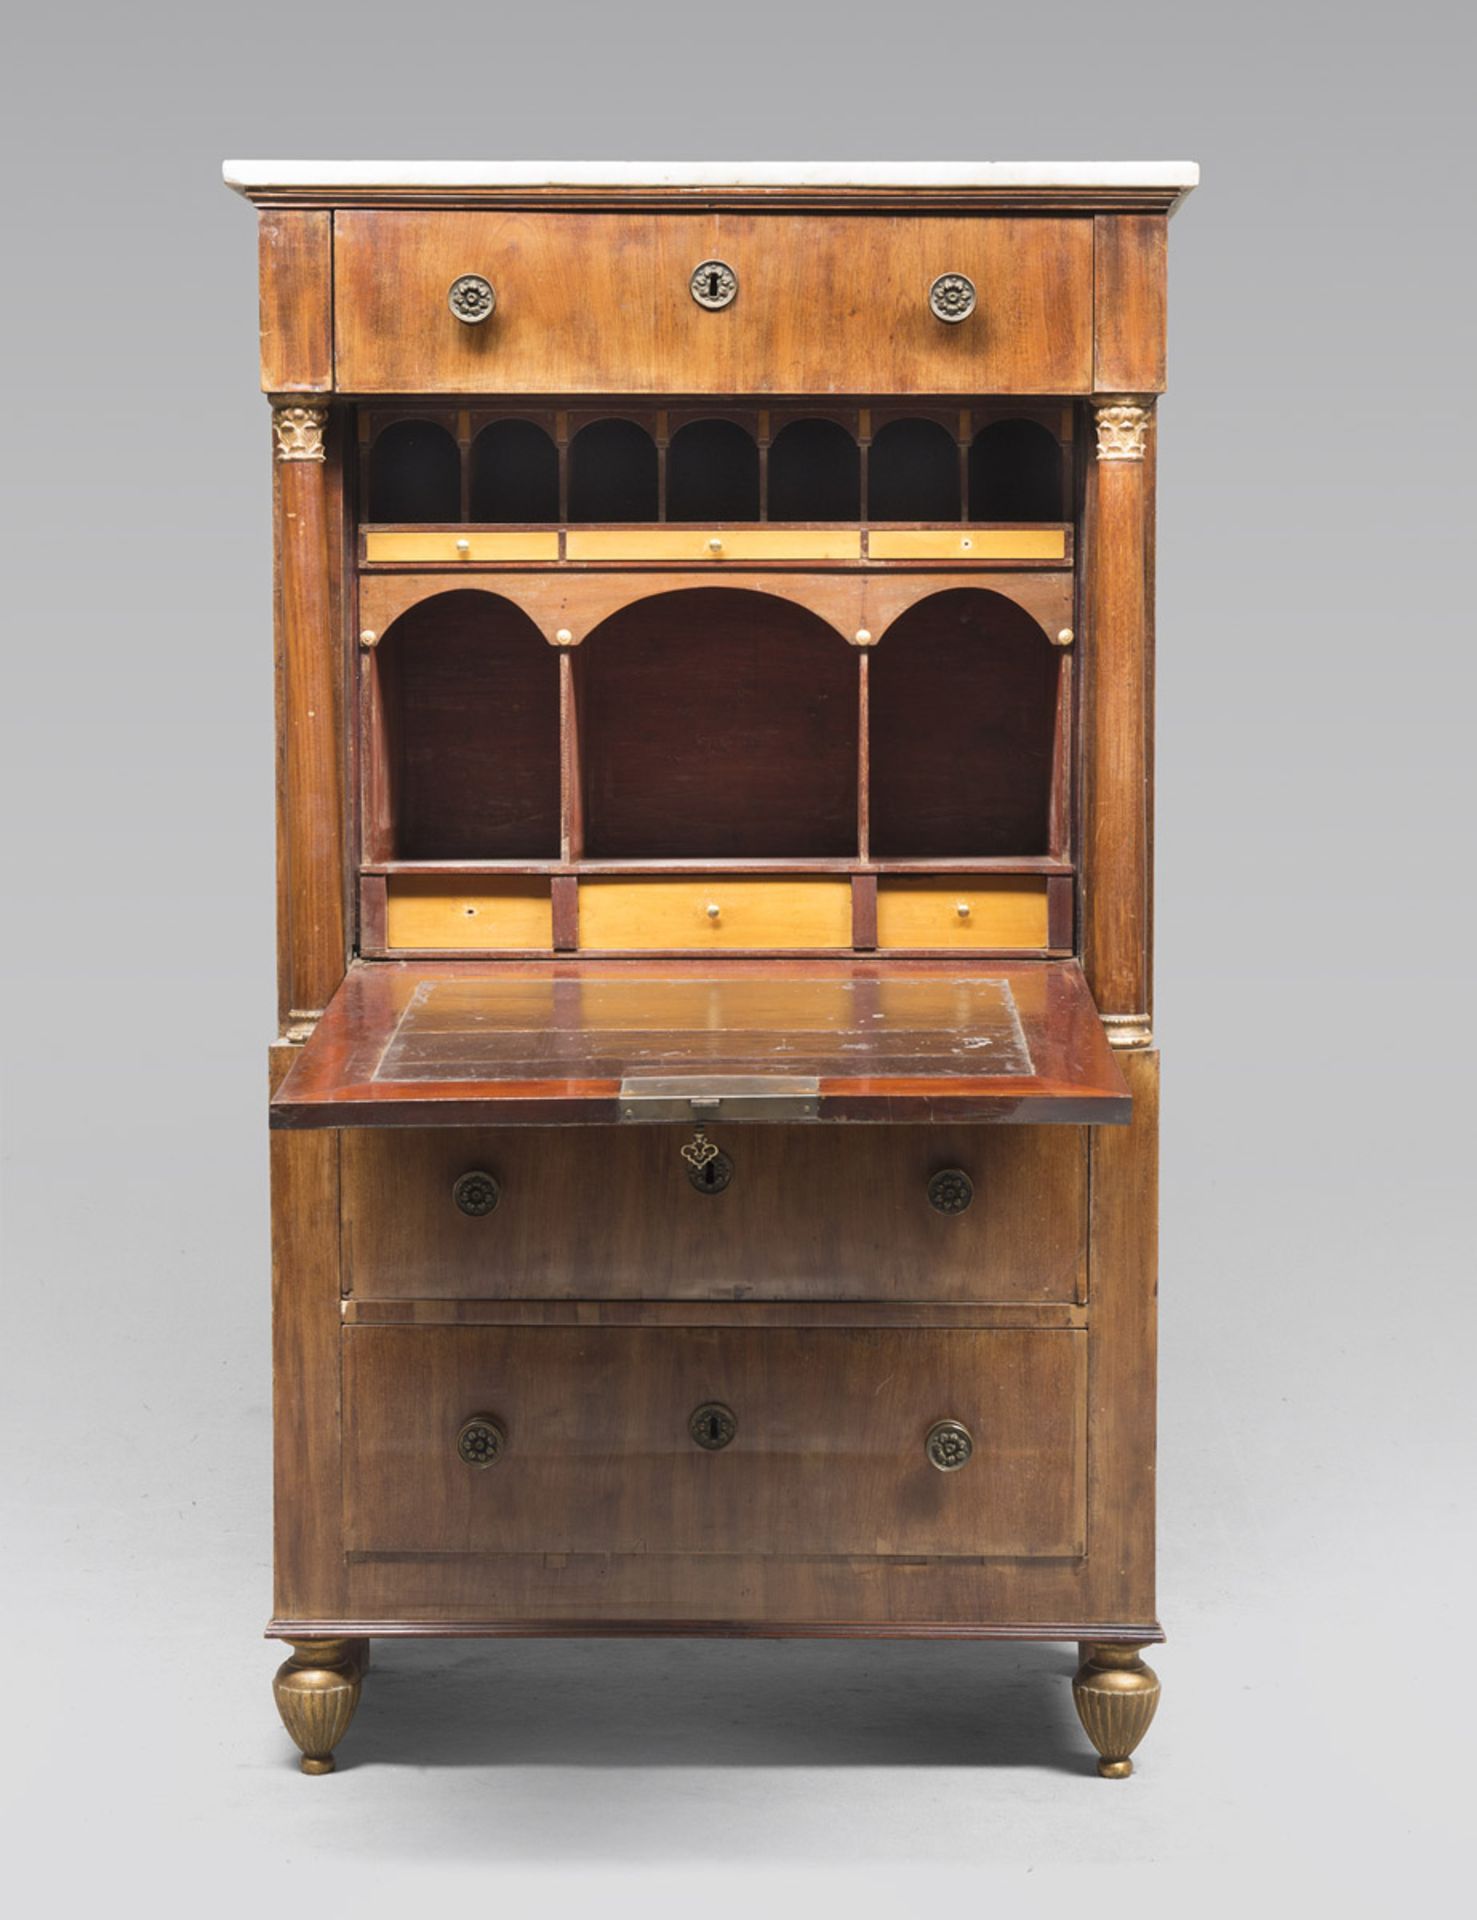 BEAUTIFUL SECRETAIRE IN WALNUT, CENTRAL ITALY 19TH CENTURY front with one drawer in the upper part - Image 2 of 2